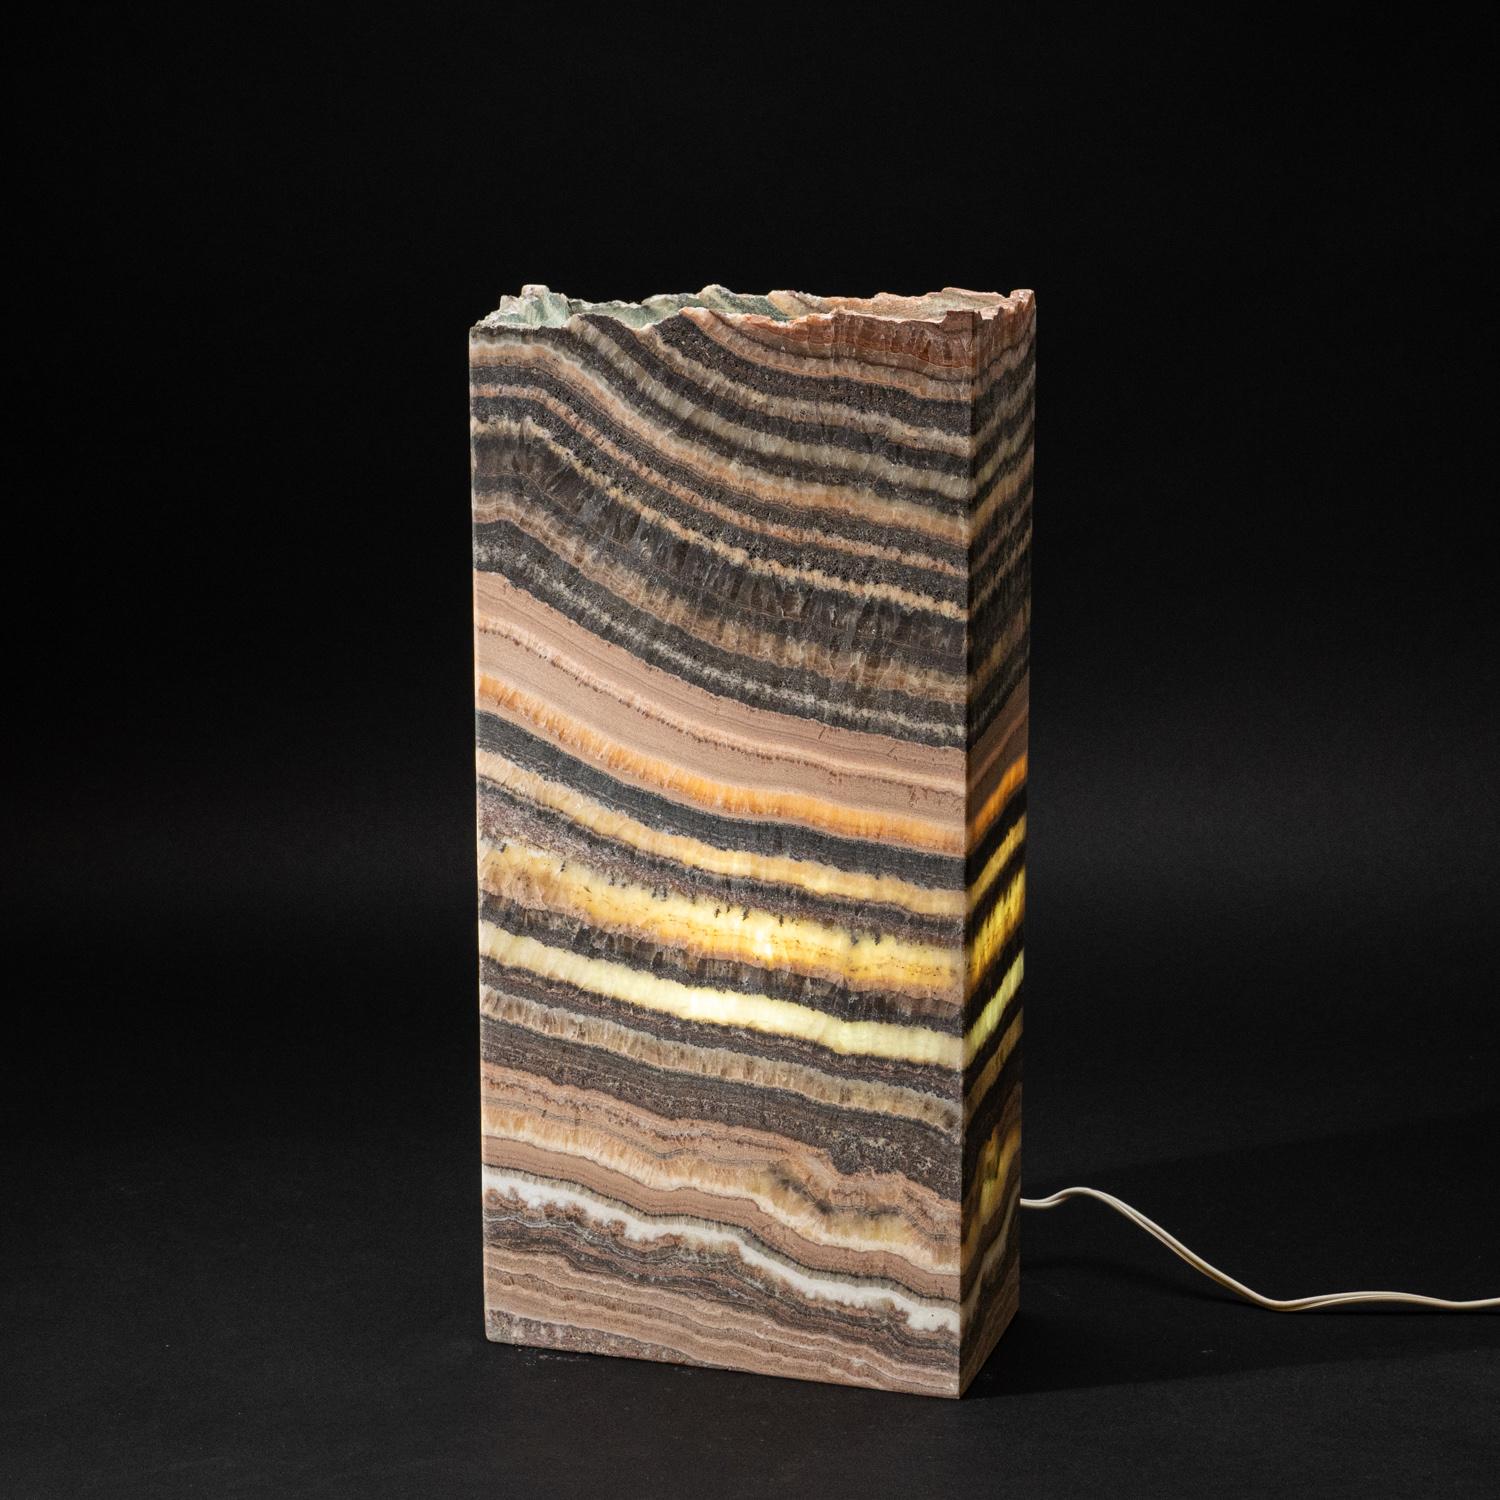 Medium square lamp composed of Natural banded Mexican onyx. This beautiful lamp is crafted from natural onyx with sophisticated appeal.  lamp will look great in your home as a perfect accent to lighting in various rooms.

In crystal healing, Banded